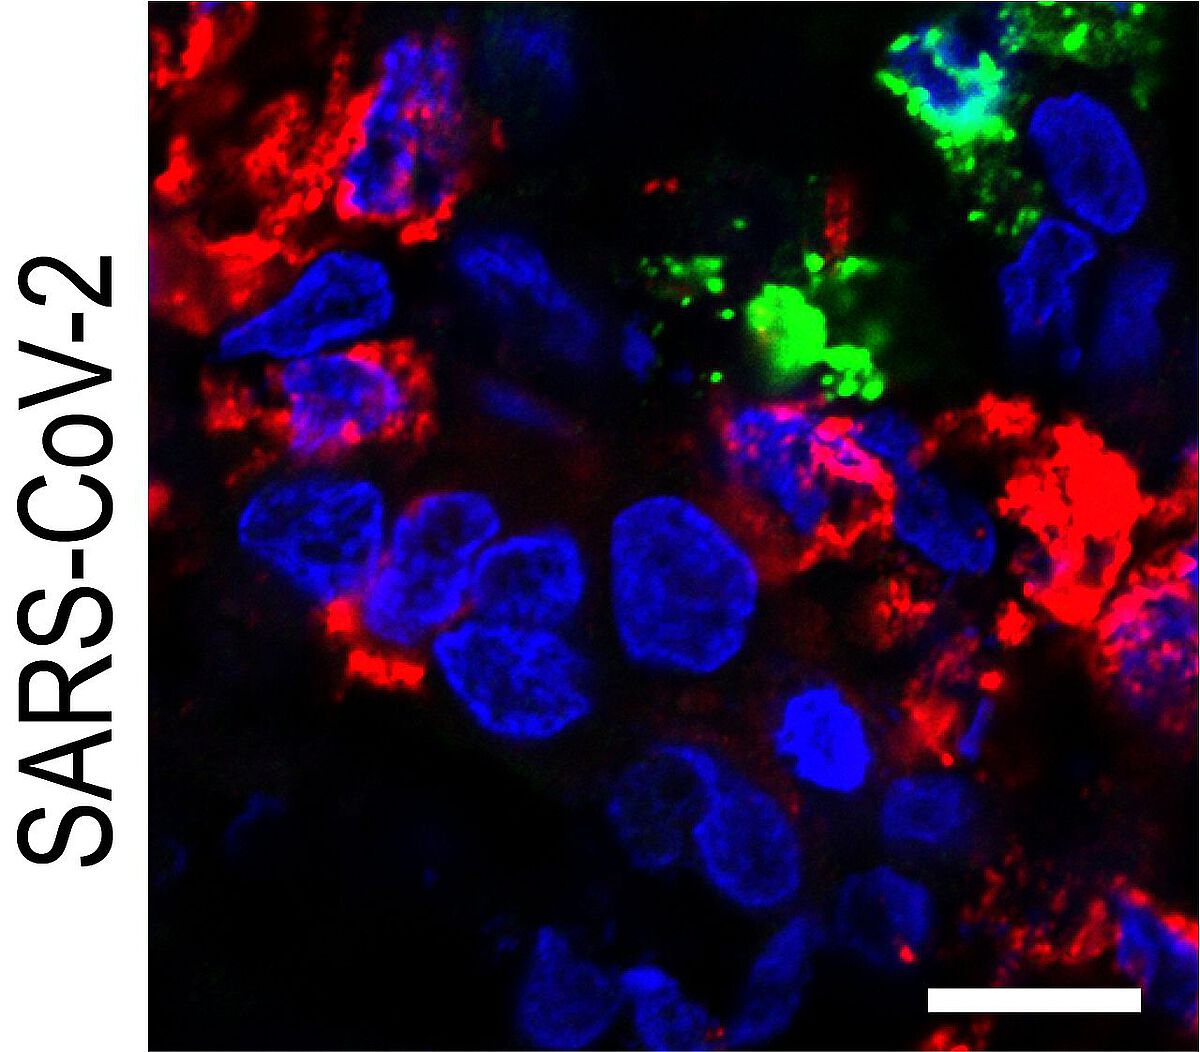 Fluorescence micrographs (merge) of SARS-CoV-2-infected beta cells